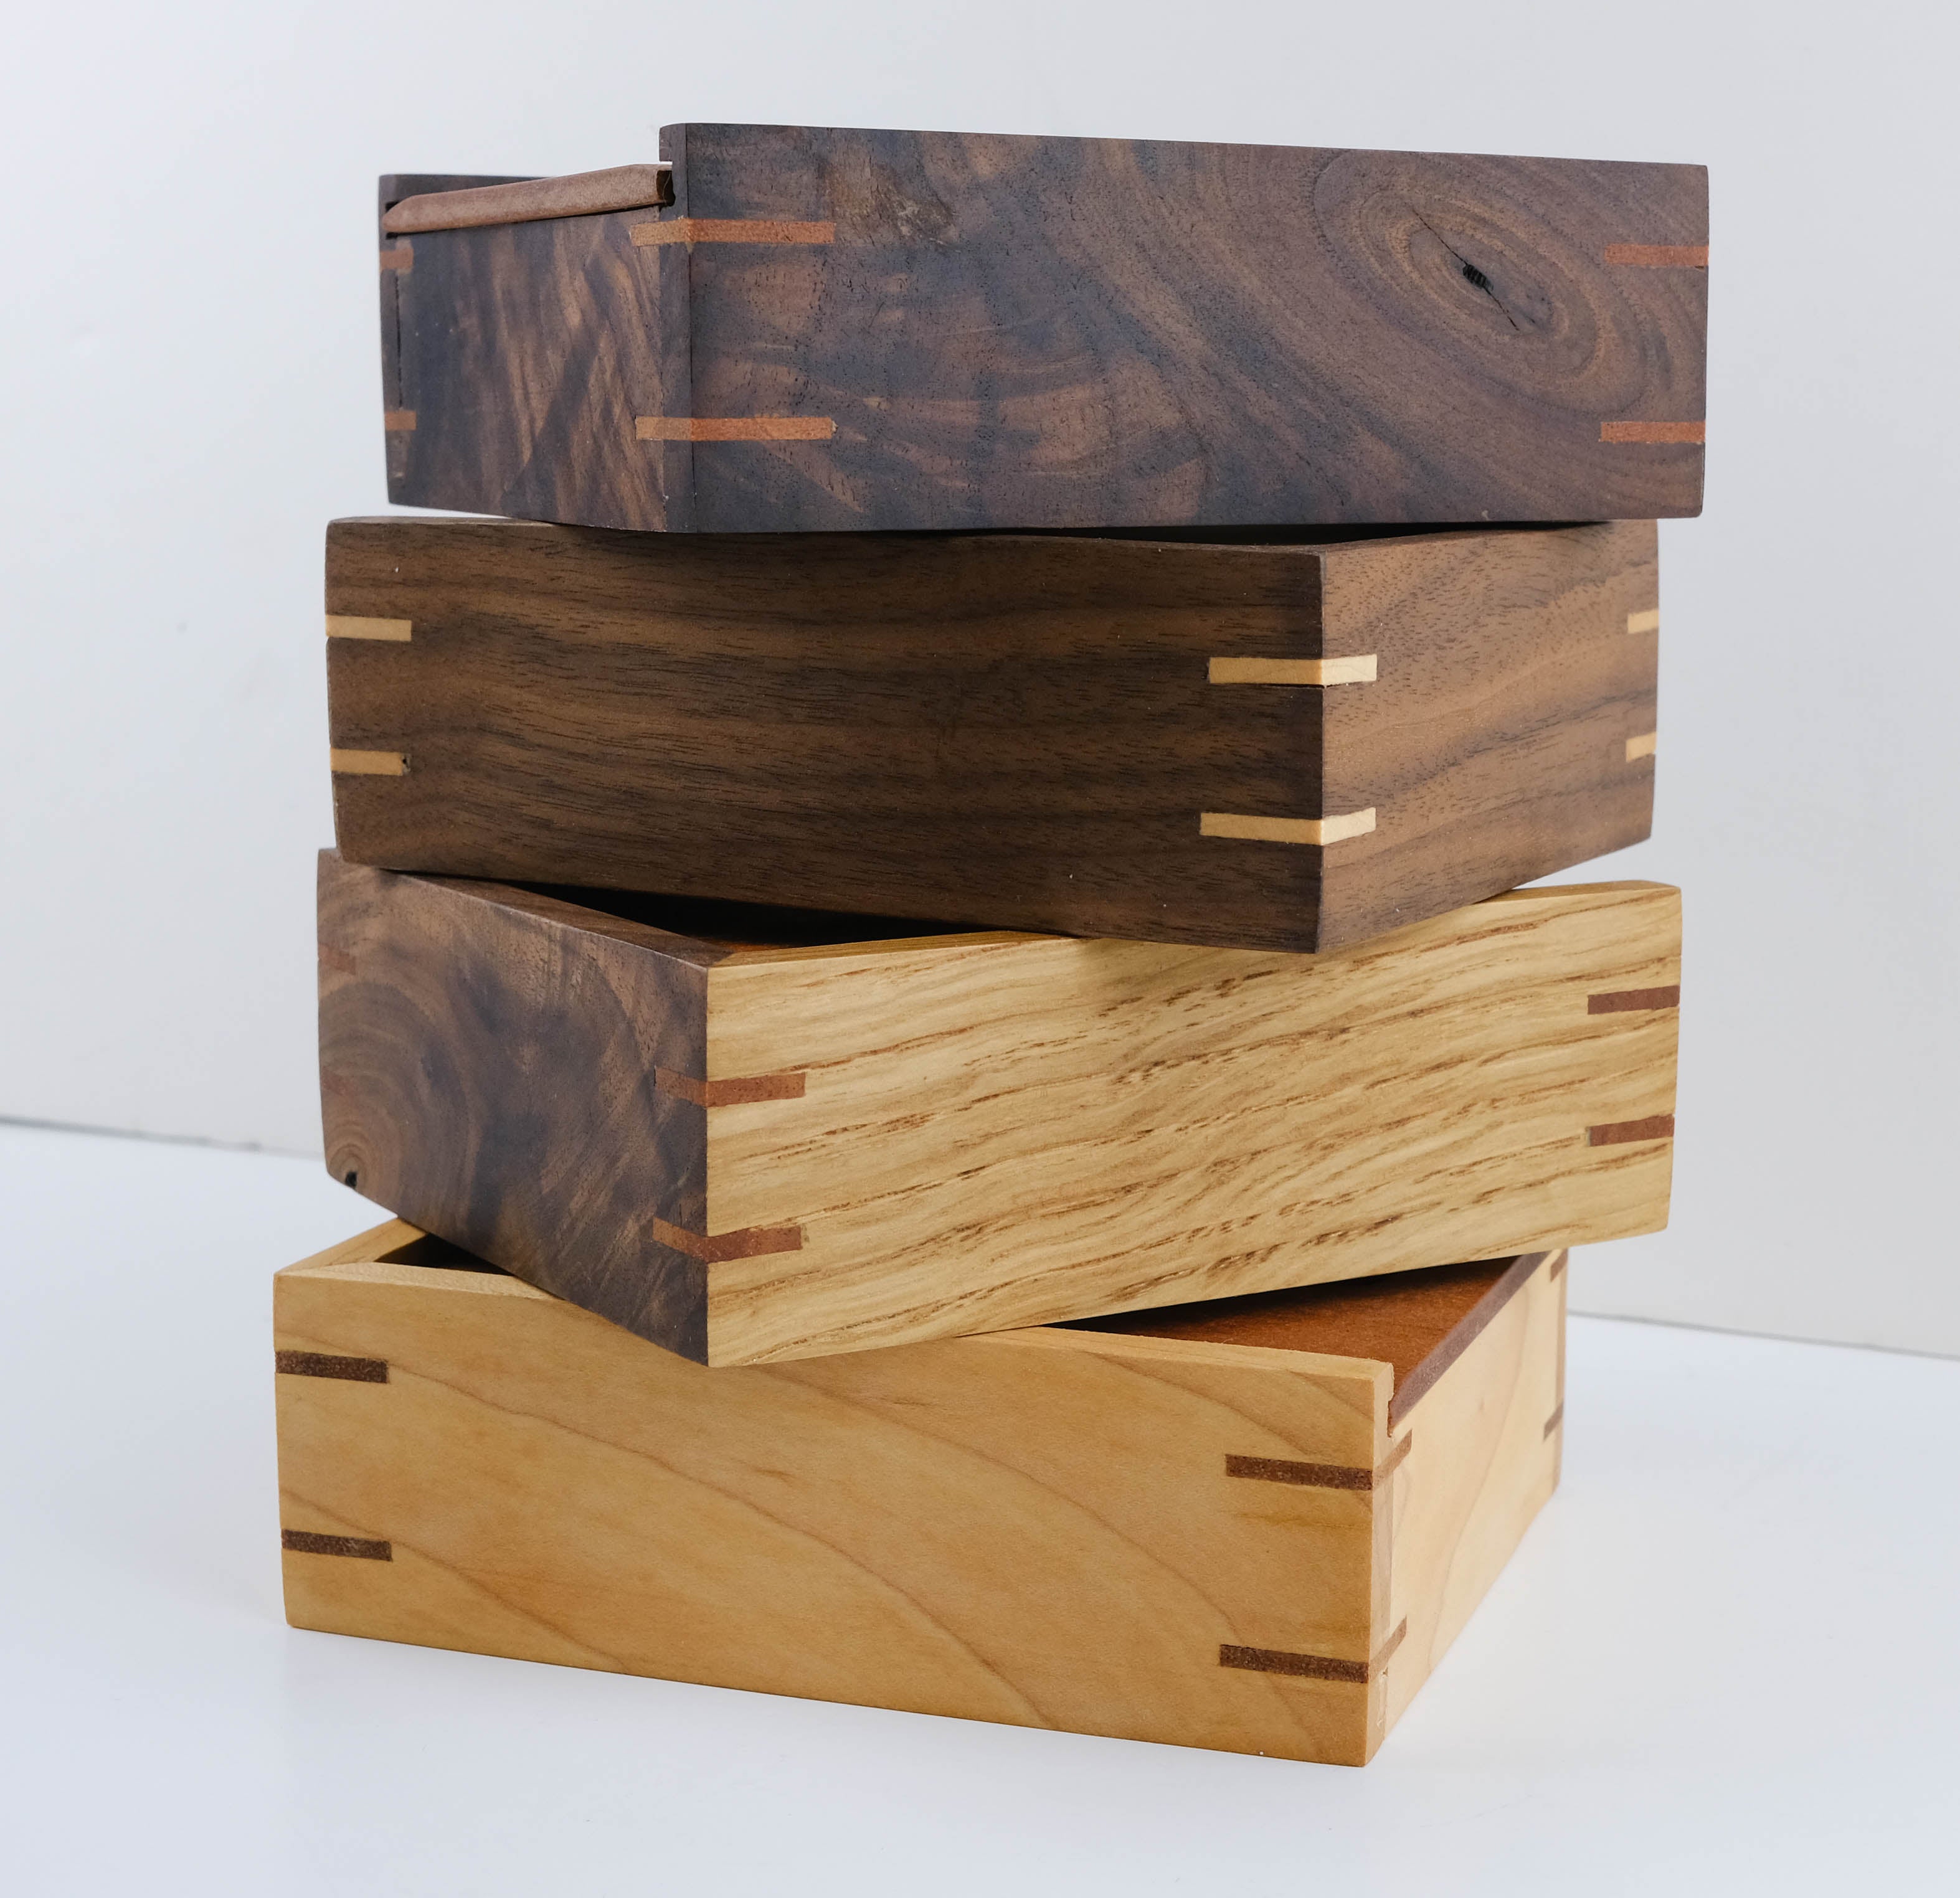 Riverbank Woodcrafts - Beautiful hand-made wooden sewing boxes